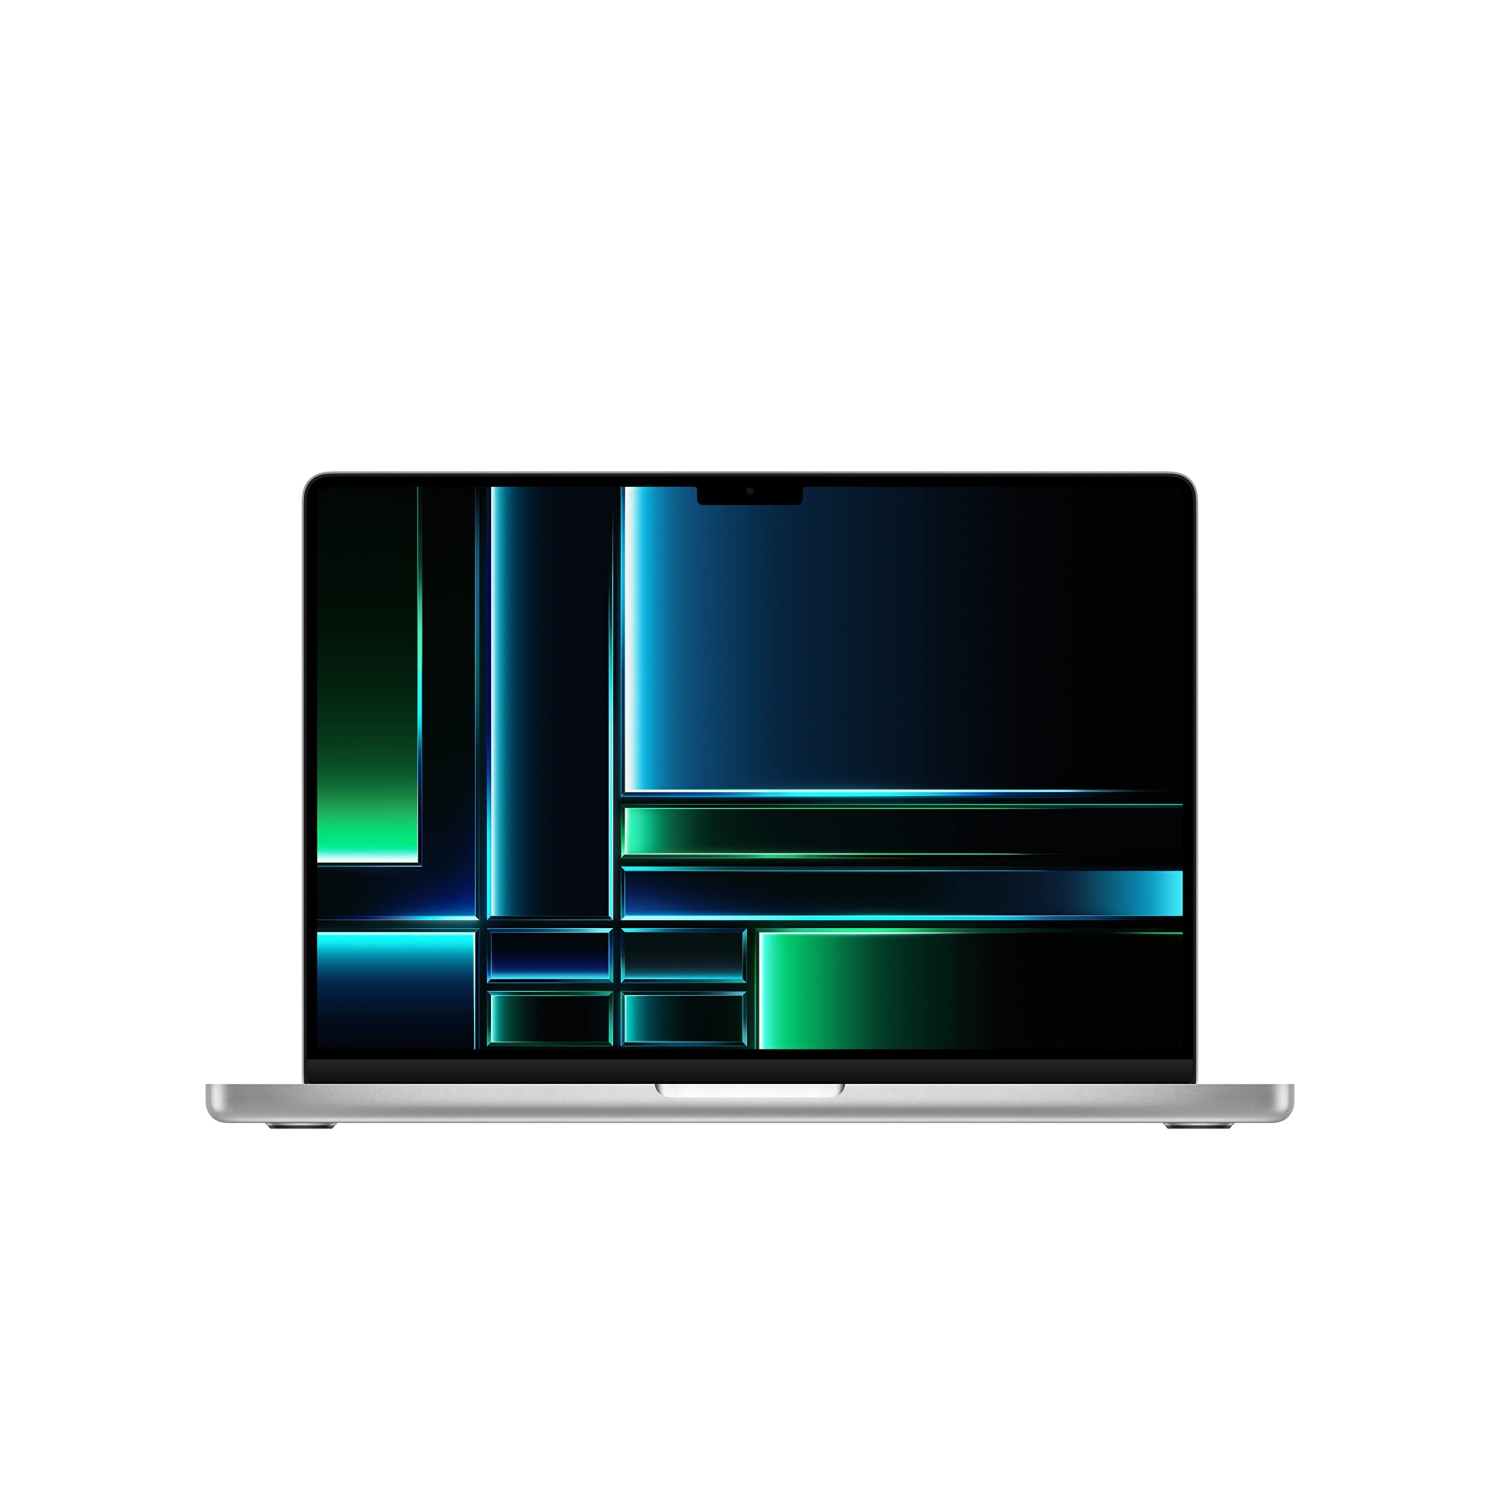 Apple 2023 MacBook Pro Laptop M2 Pro chip with 10‑core CPU and 16‑core GPU: 14.2-inch Liquid Retina XDR Display, 16GB Unified Memory, 512GB SSD Storage. Works with iPhone/iPad; Sil